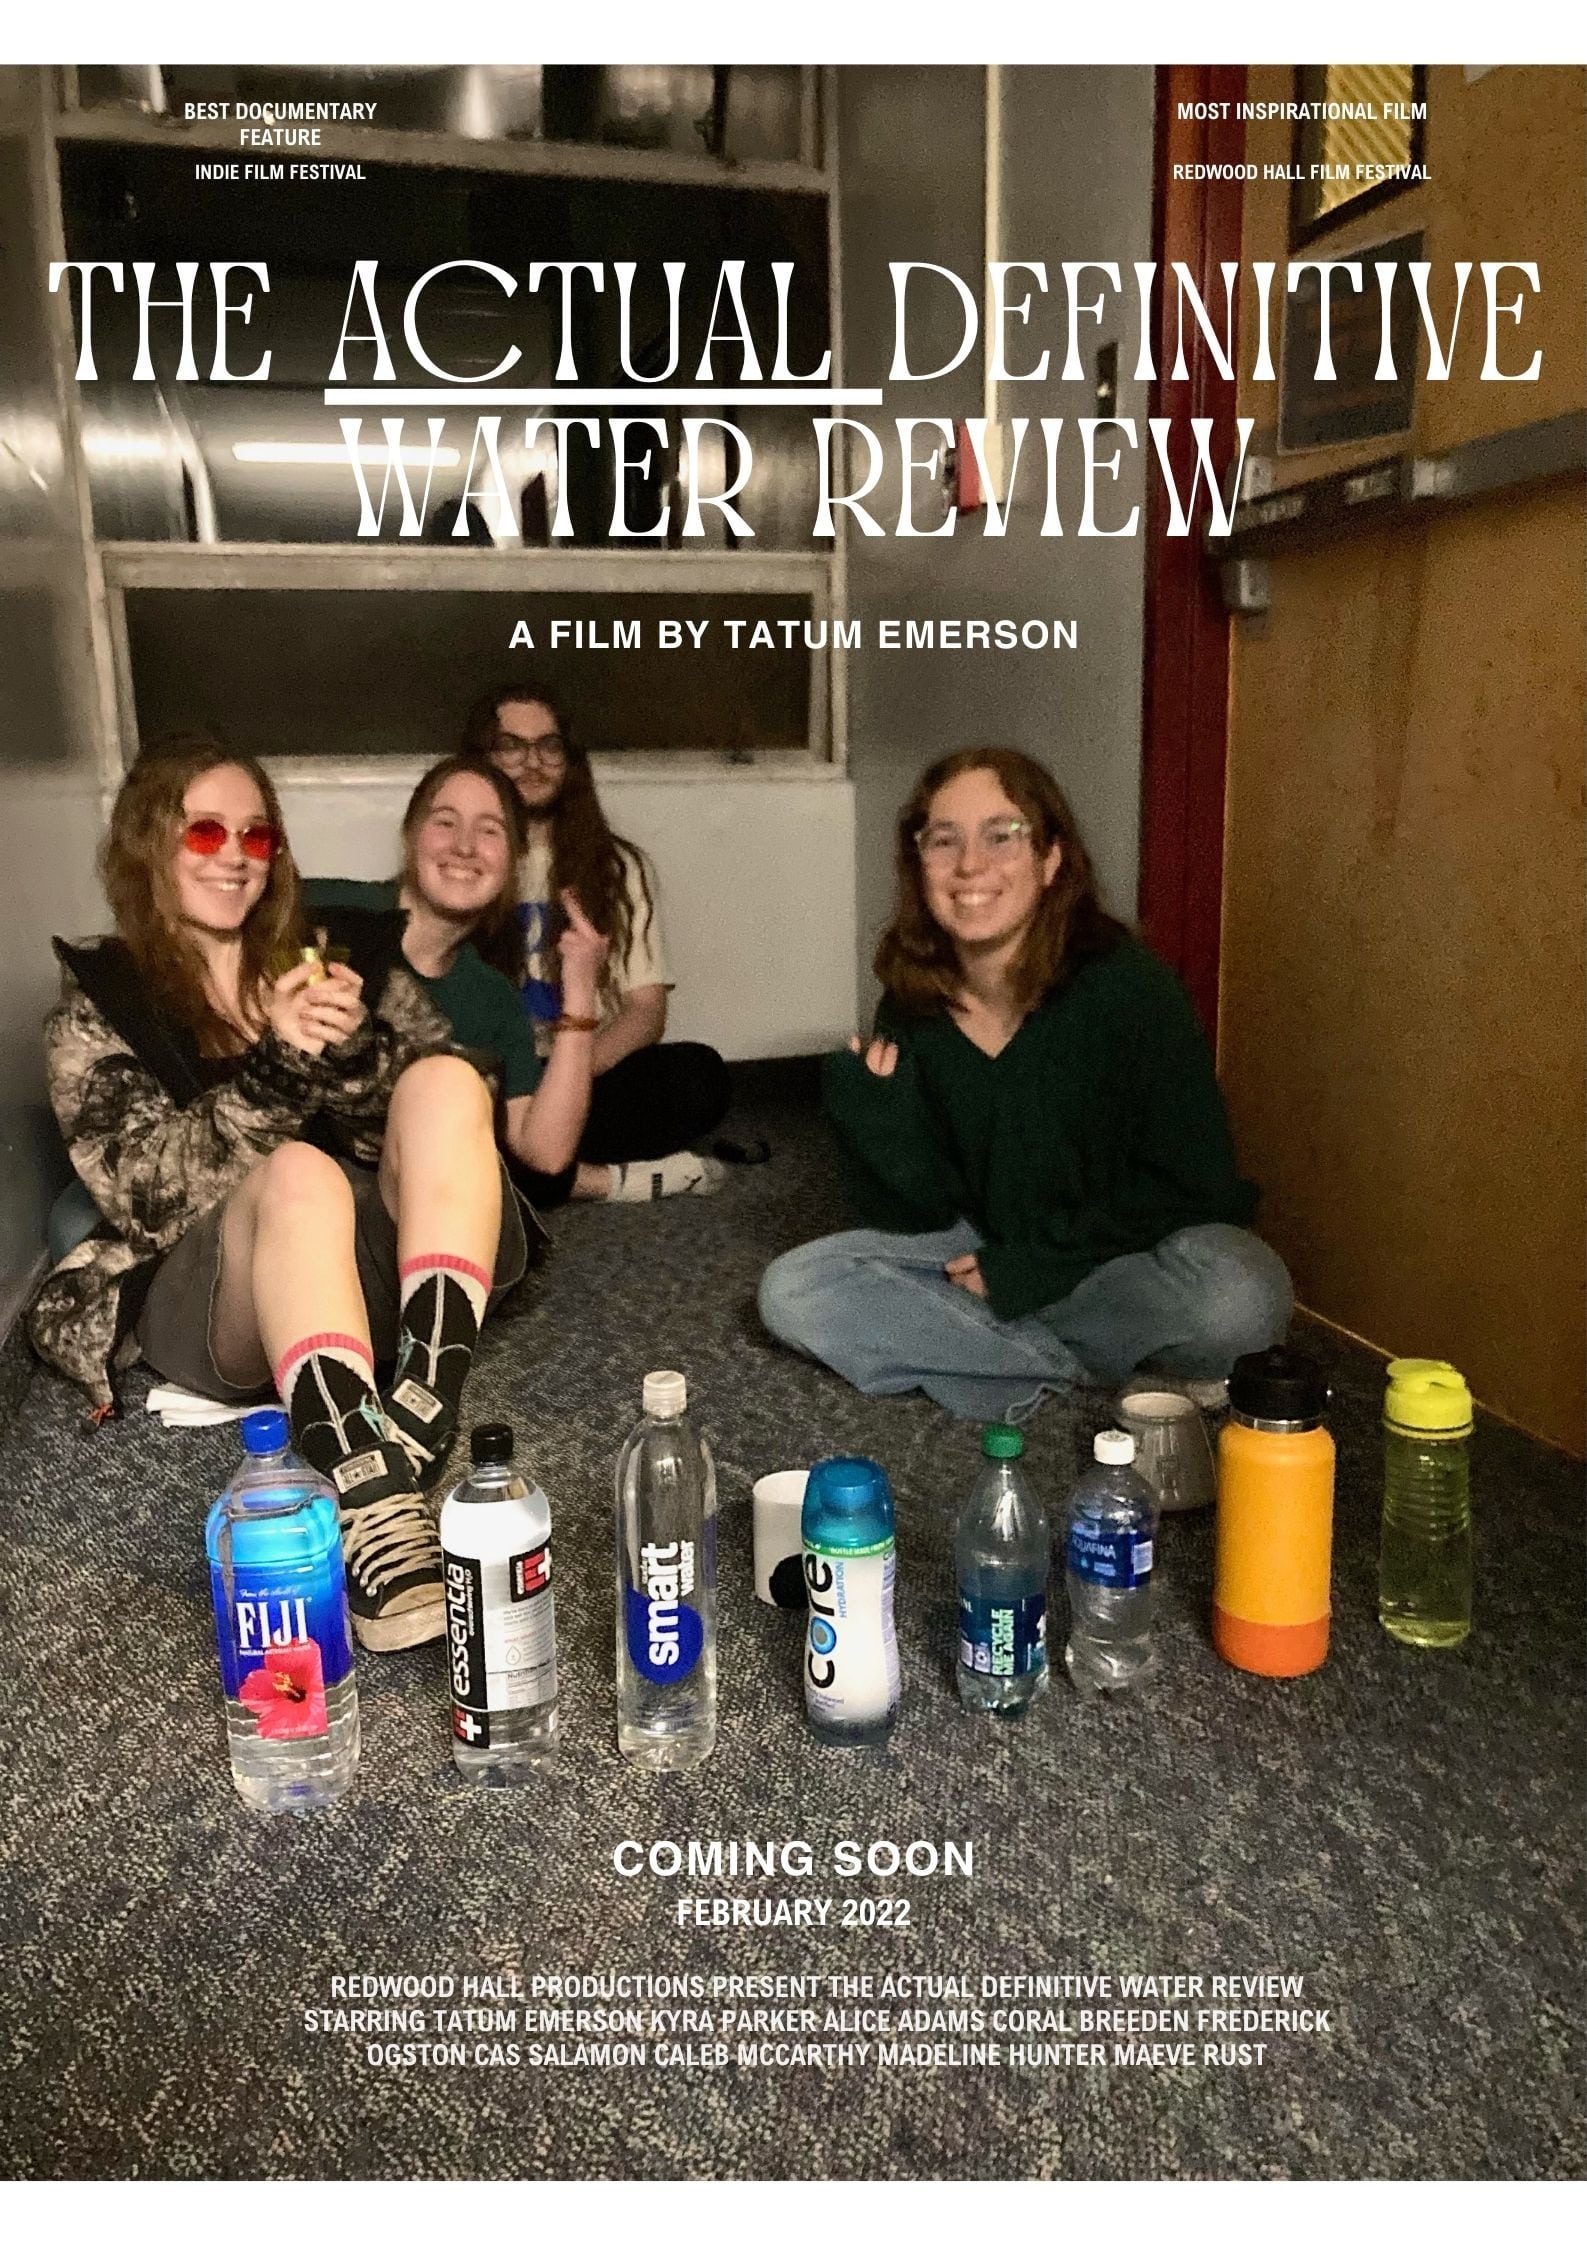 The ACTUAL Definitive Water Review